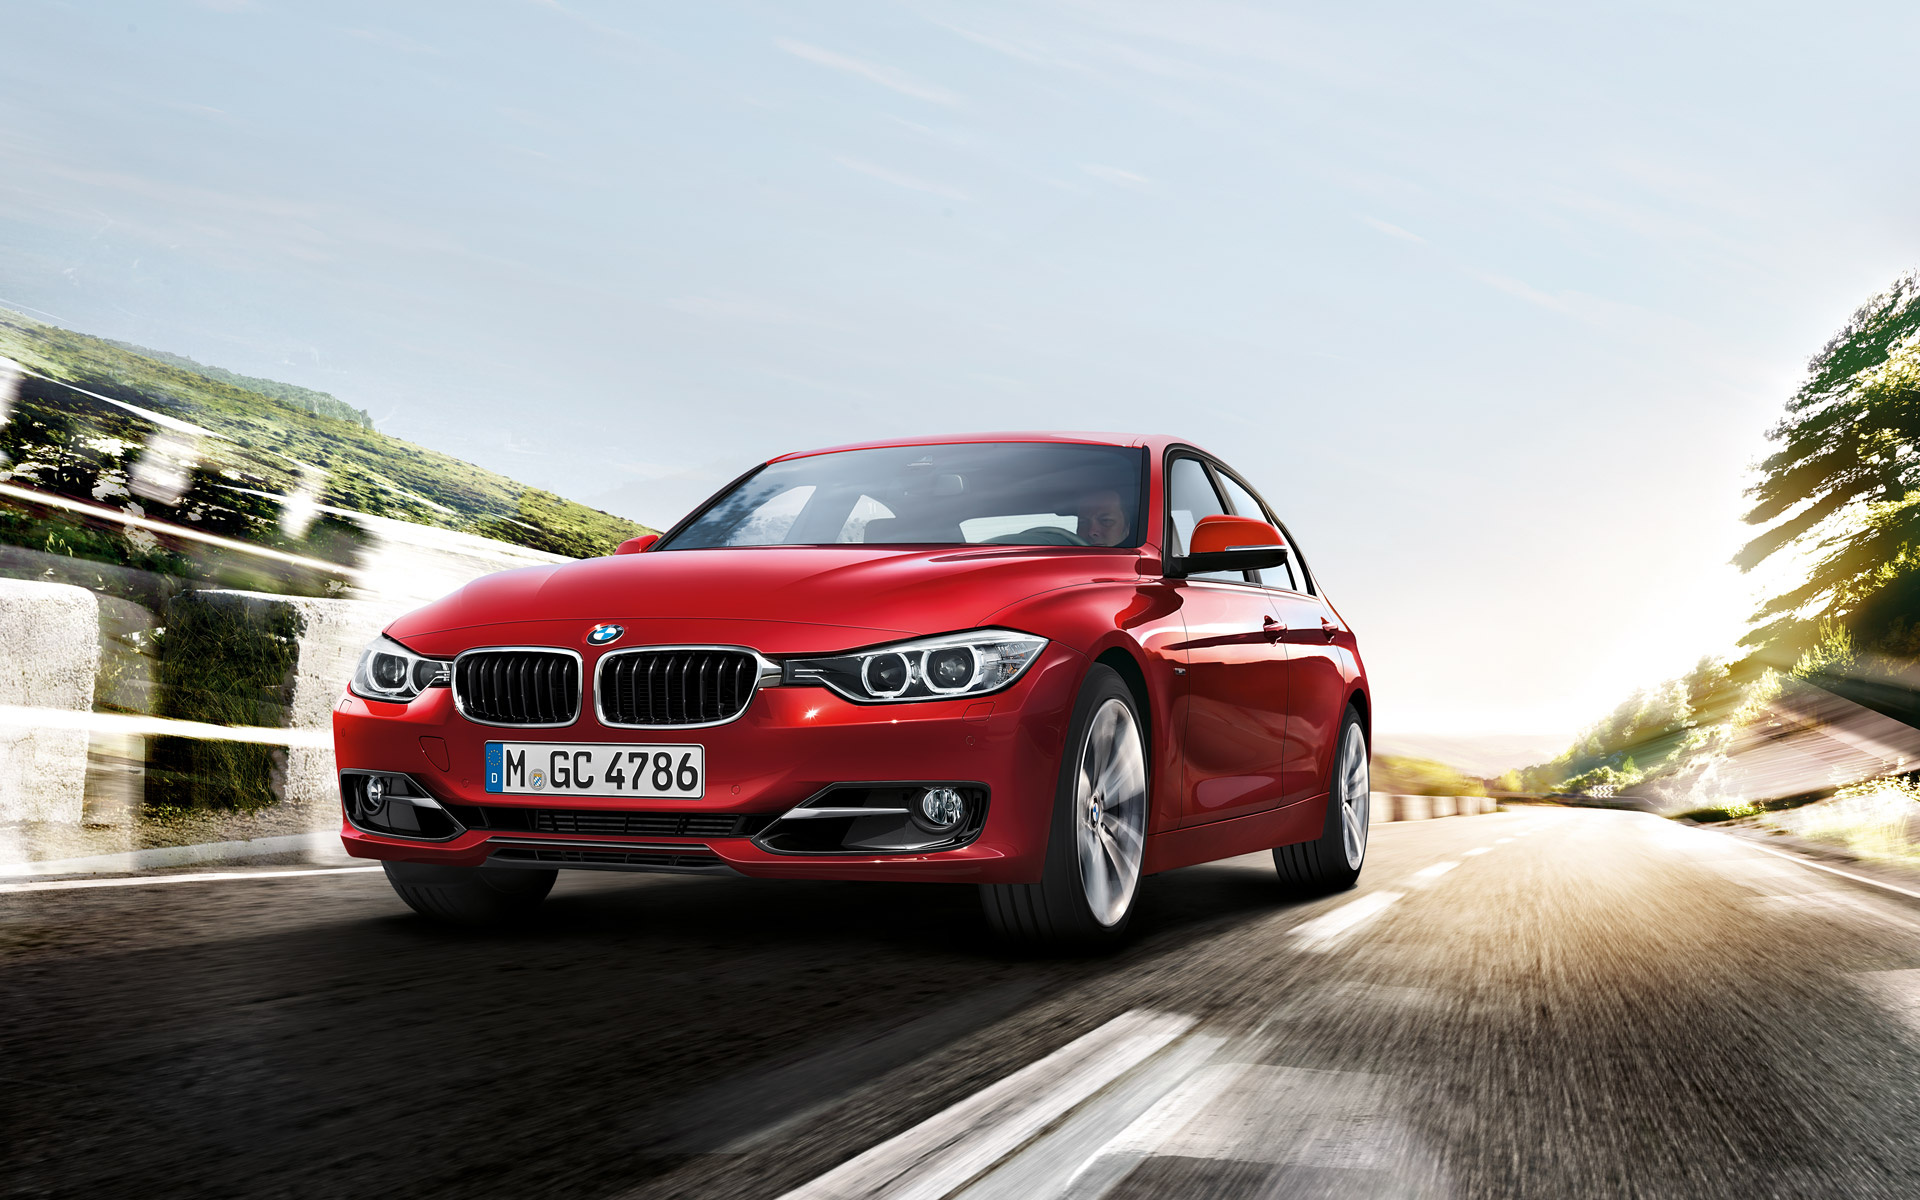 BMW 3 Series, Cutting-edge technology, Exceptional performance, Stylish appearance, 1920x1200 HD Desktop